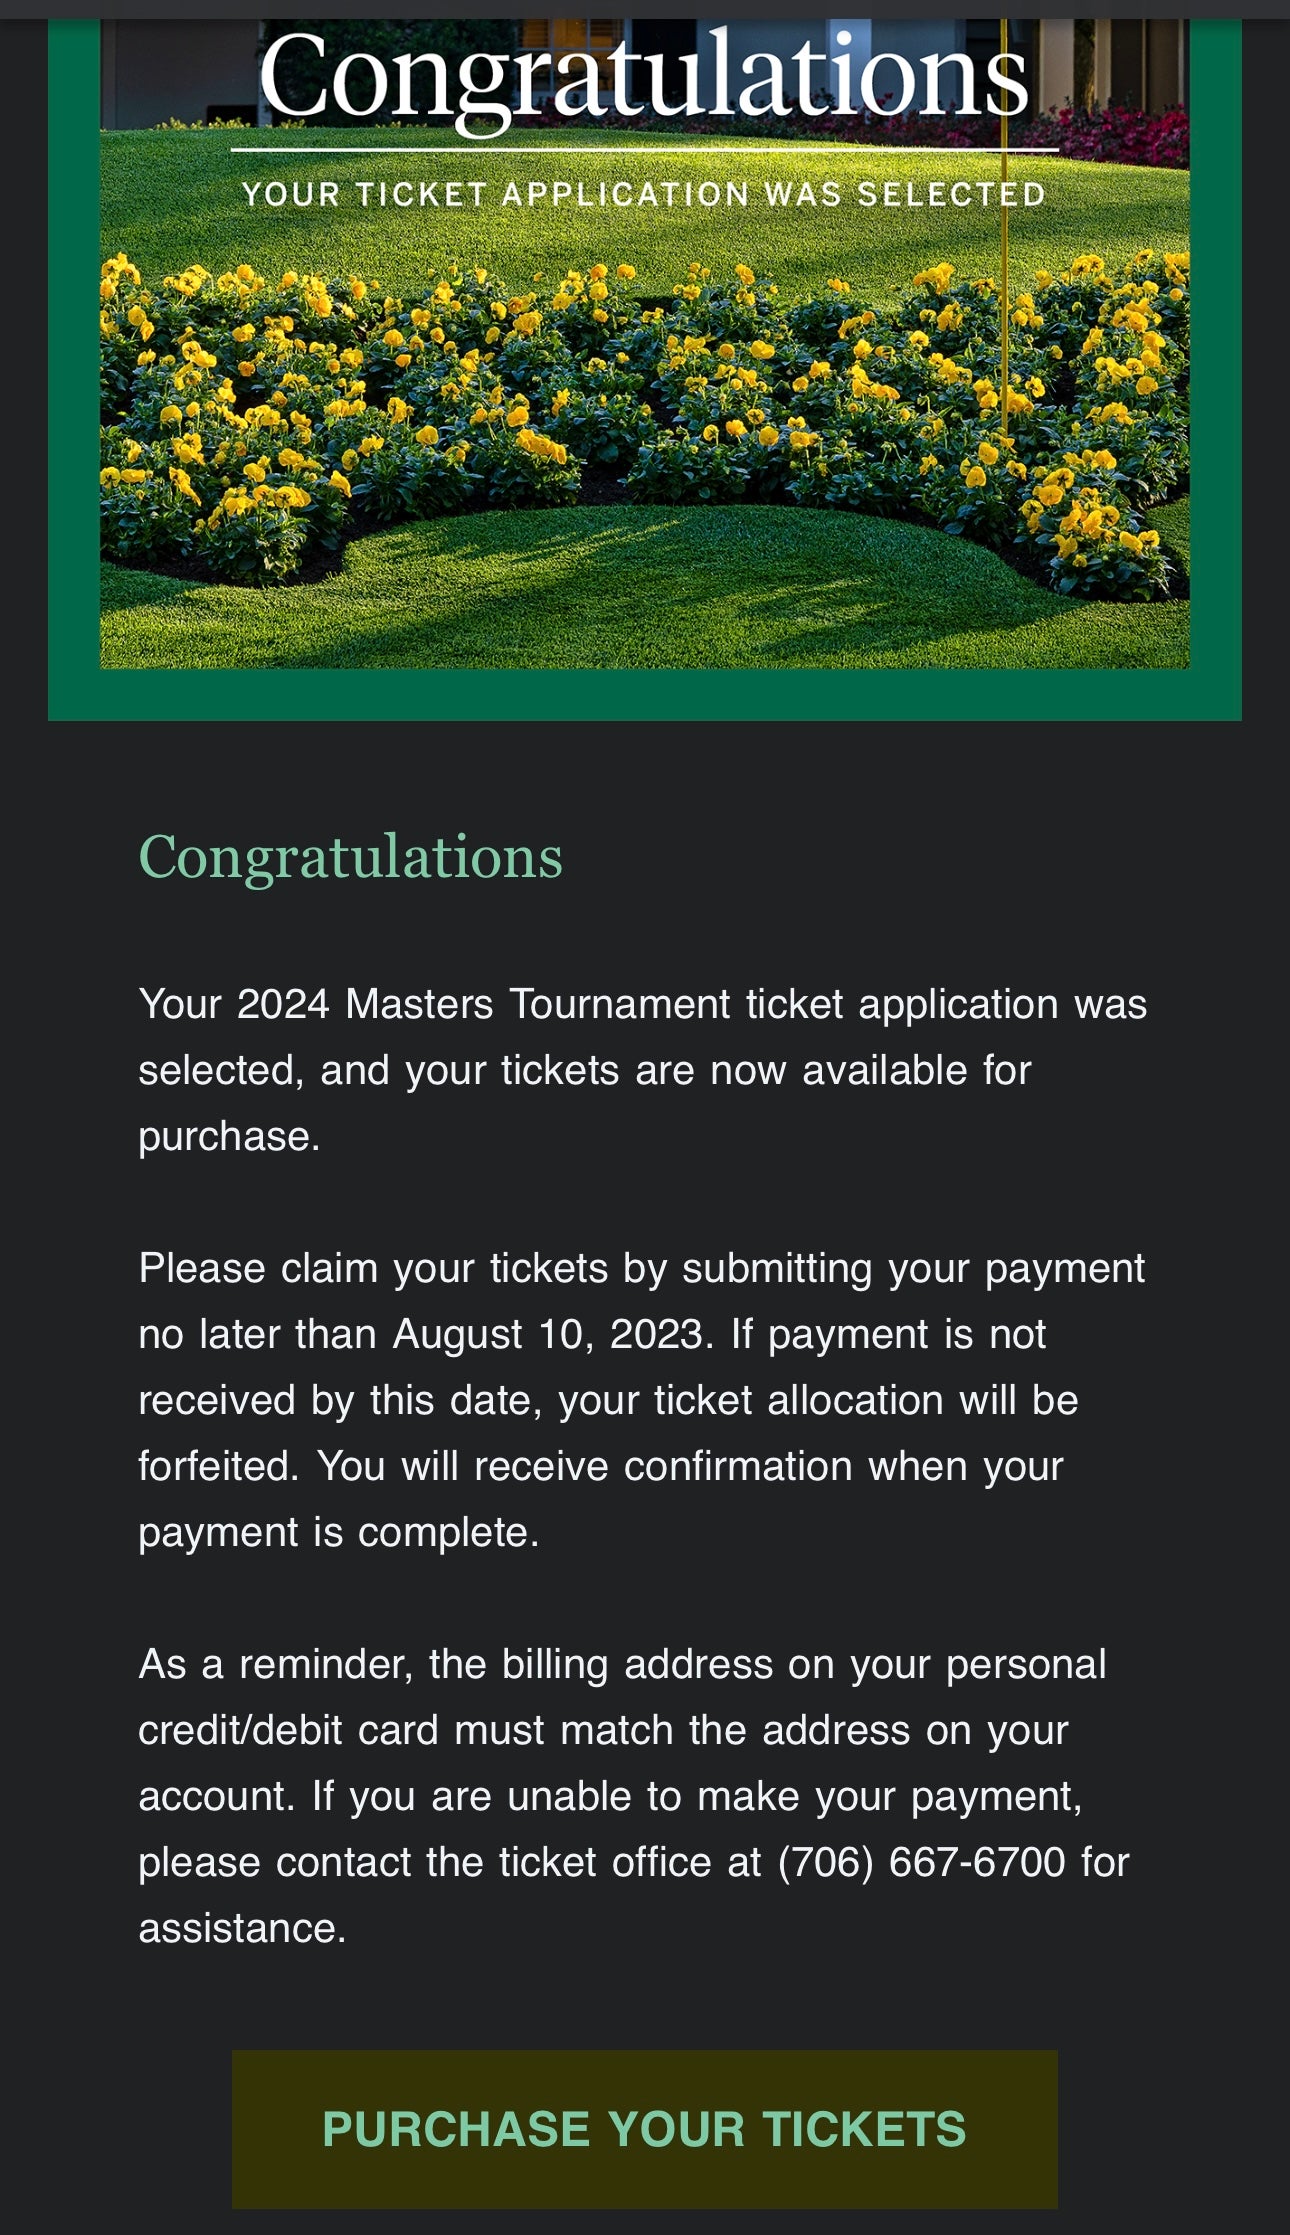 Masters tickets 2023 lottery: Here's how to apply